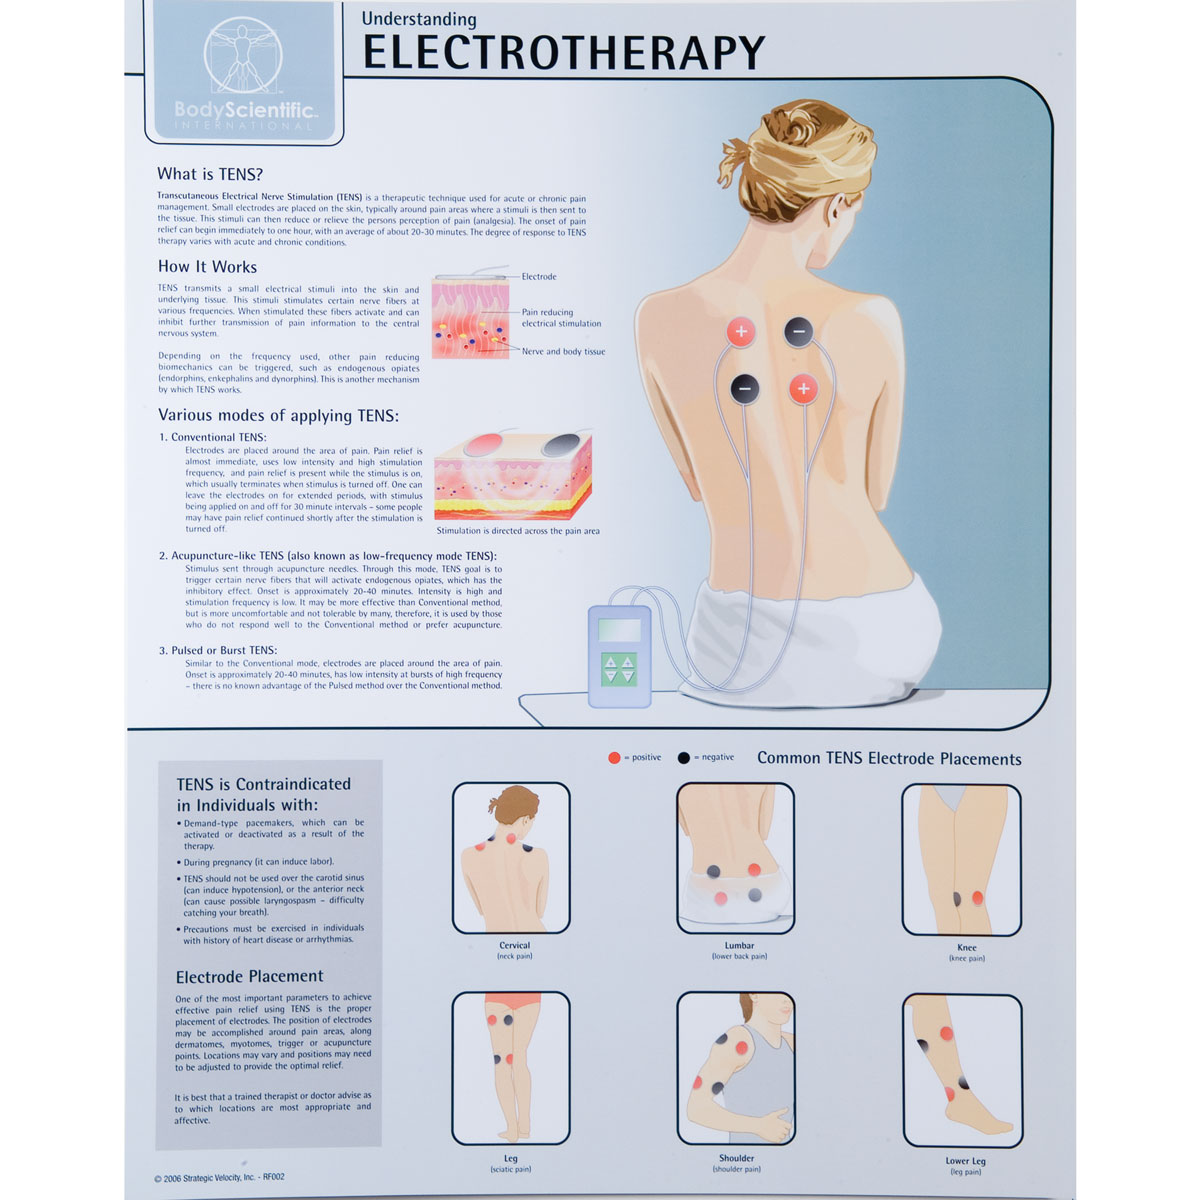 https://www.3bscientific.com/thumblibrary/W59506/W59506_01_1200_1200_Electrotherapy-Chart-Laminated.jpg